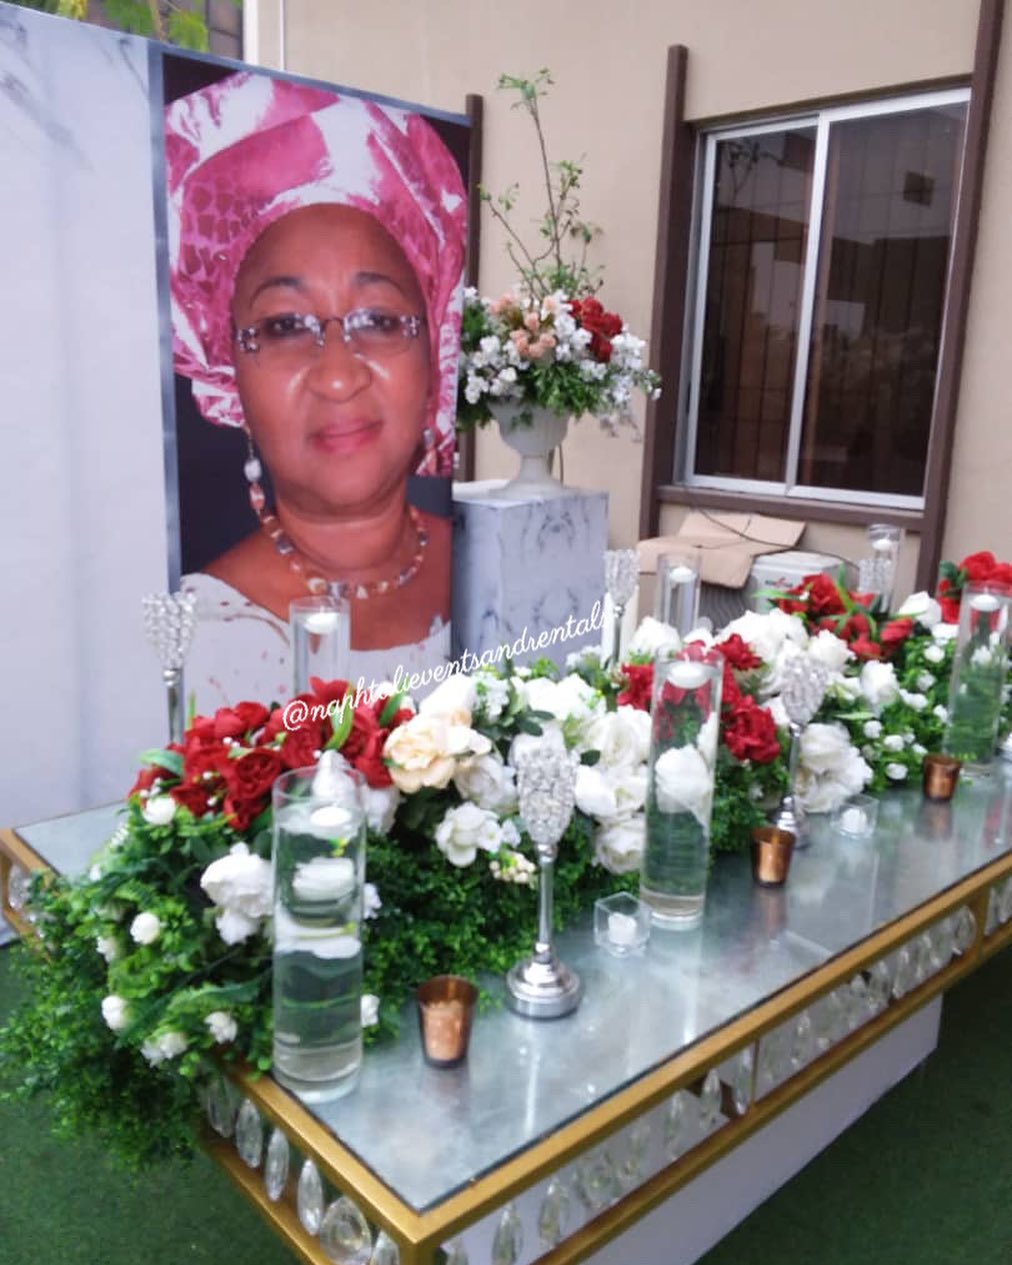 149810871 790786384849023 5919891854001182275 n - We miss you and may your soul rest in peace 

Event supplies and decor setup by @naphtalieventsandre...